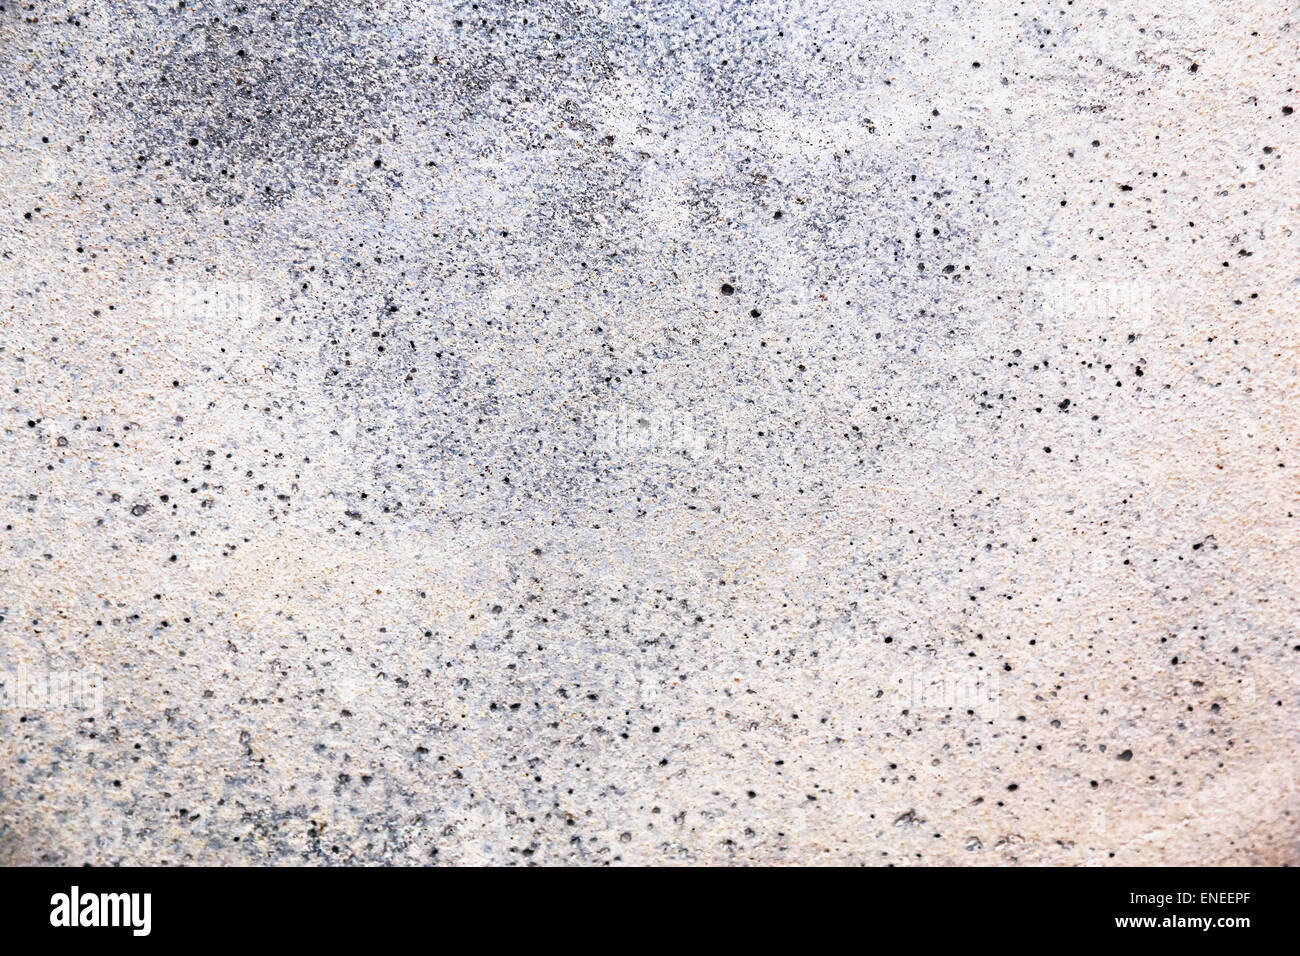 Grunge plaster cement or concrete wall texture white and gray color Stock Photo